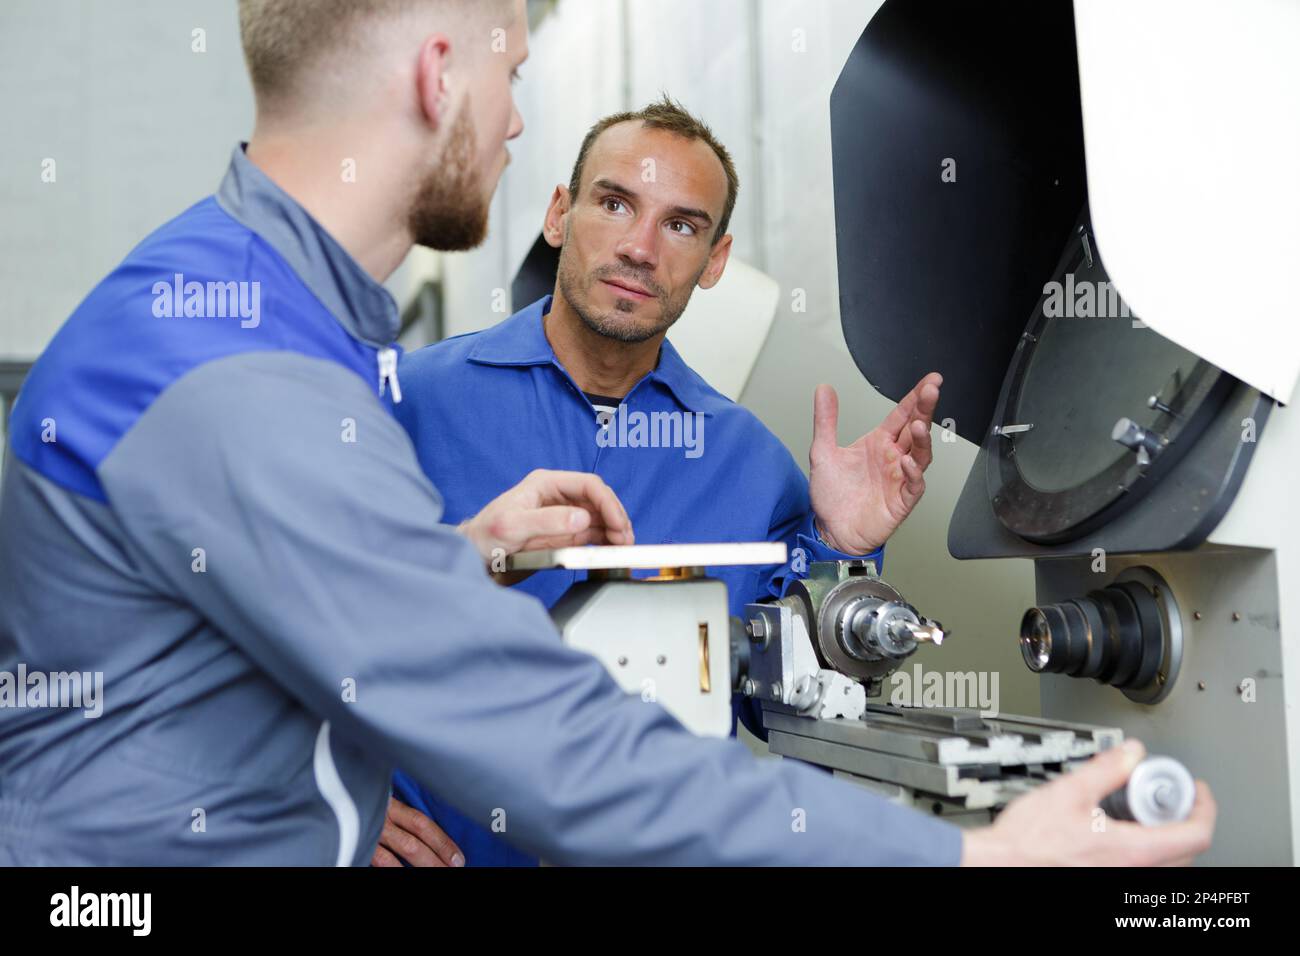 two workers at a manufacturing plant Stock Photo